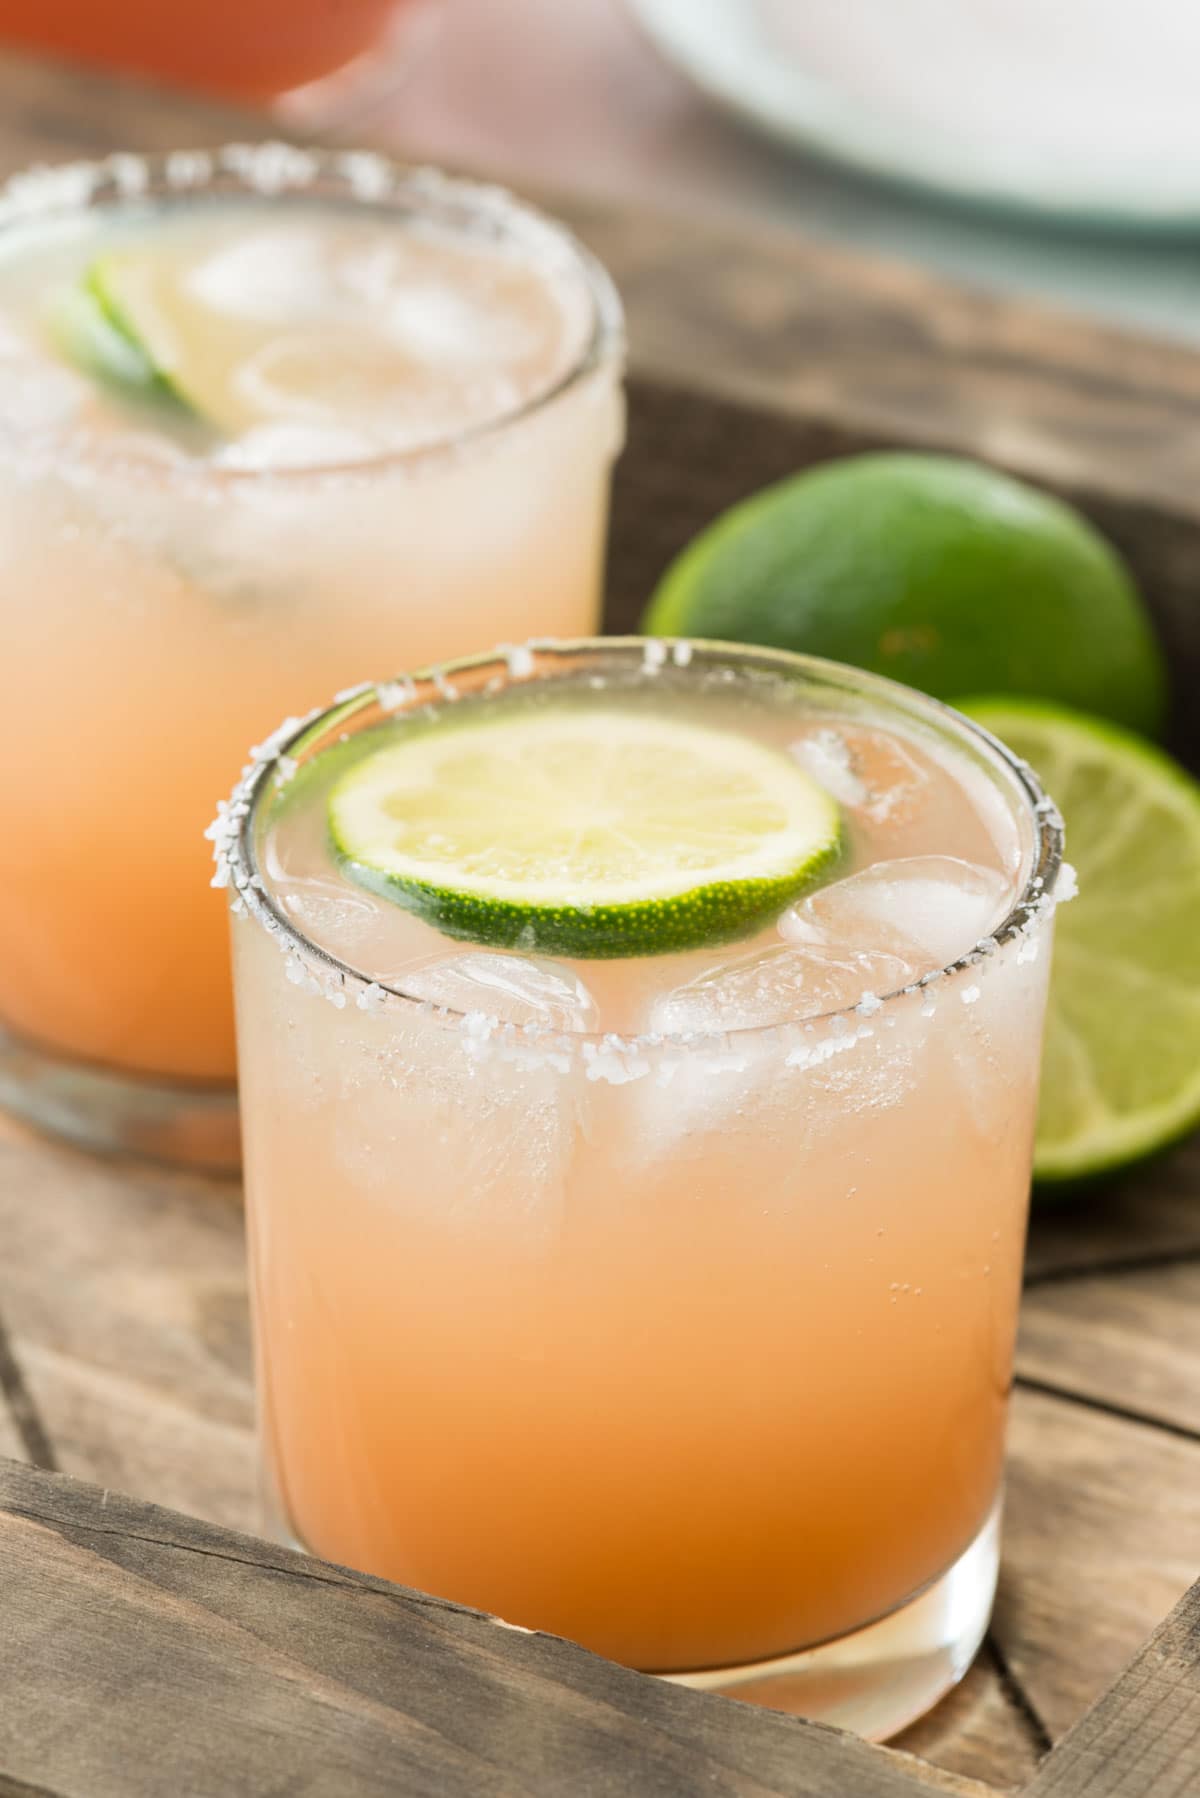 Salty Dog Punch - this easy cocktail recipe is made with grapefruit juice, vodka, and soda with lime for garnish and a salted rim! It's the perfect not-to-sweet spring or summer punch!